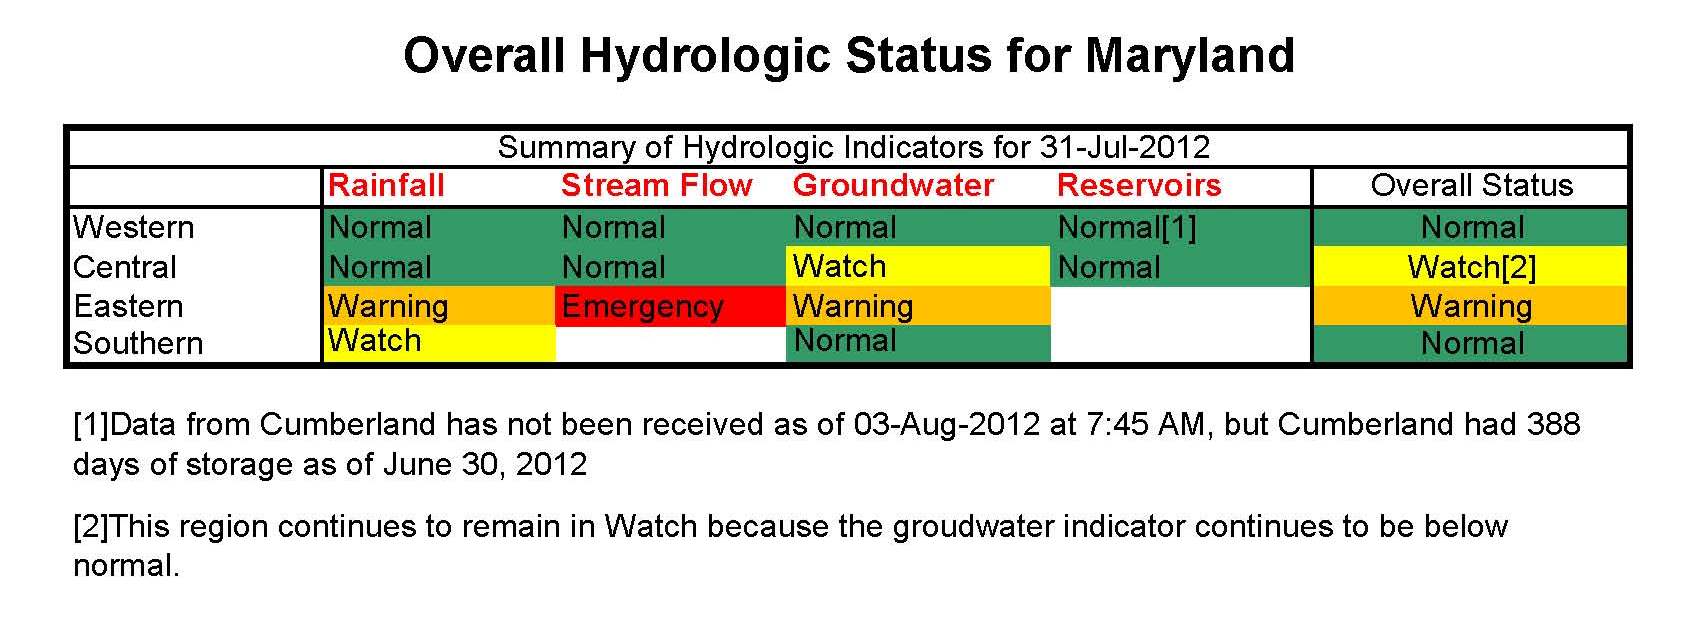 Overall Hydrologic Status for Maryland